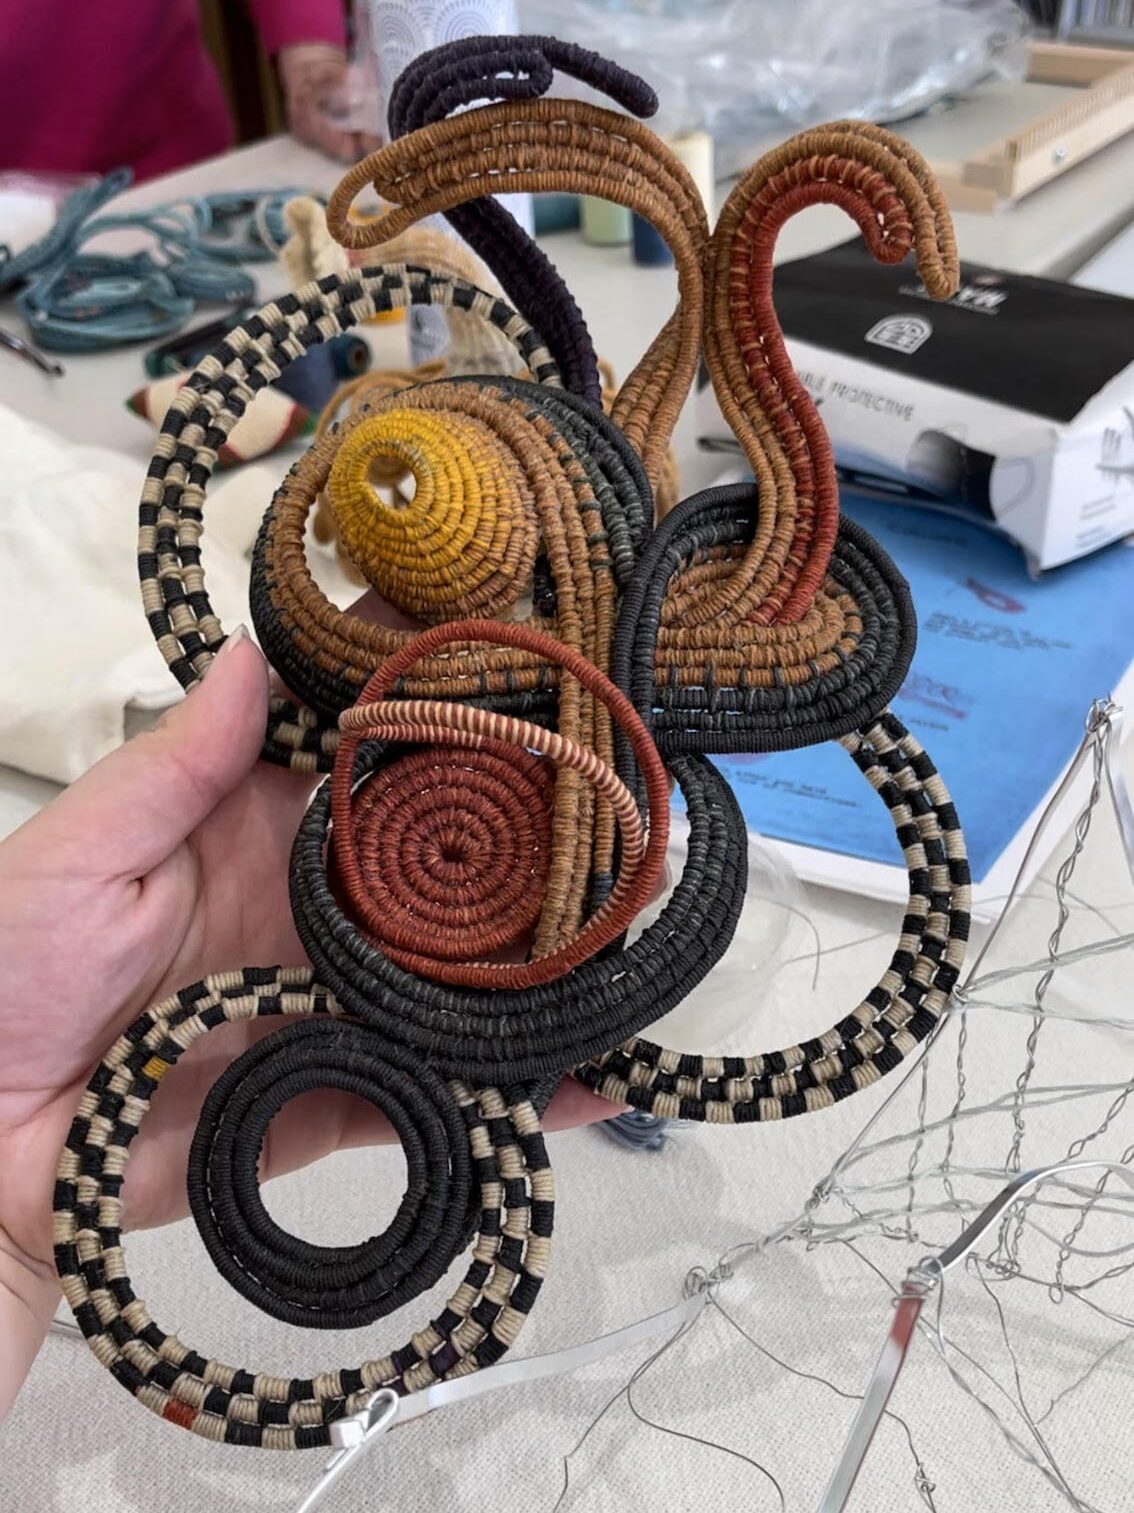 Student work brought to share in Ferne Jacobs advanced weaving workshop